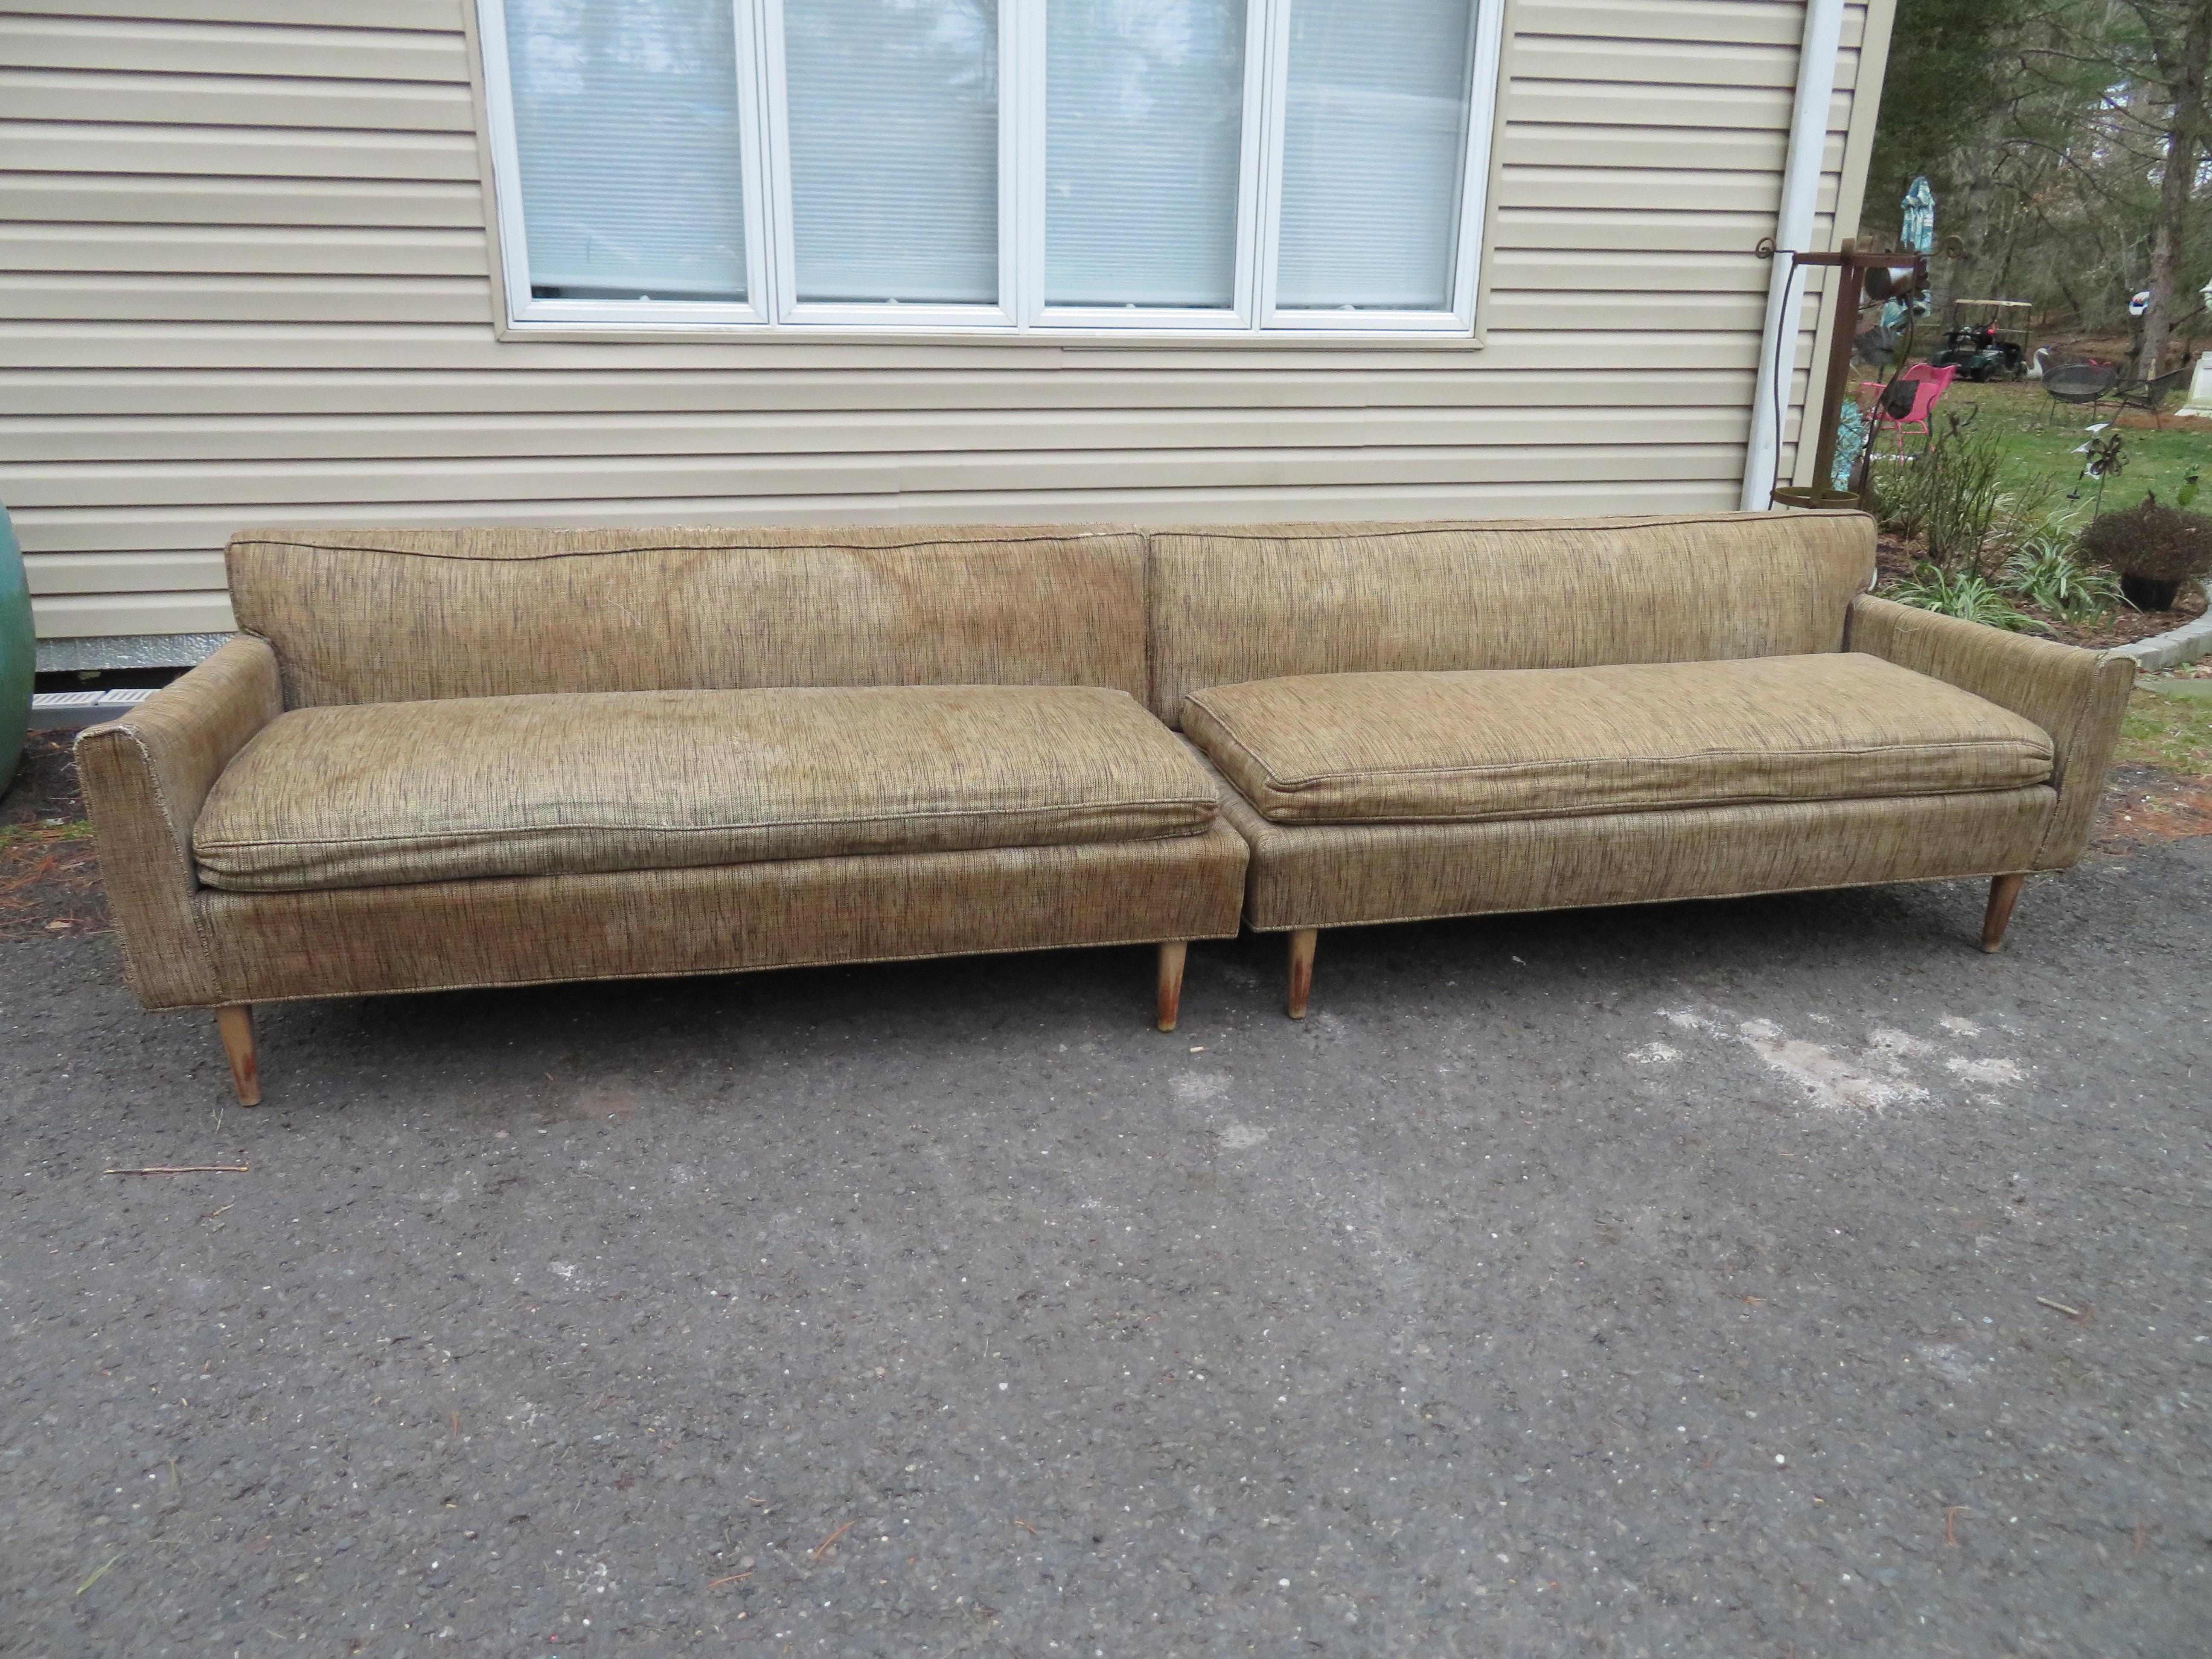 Stylish and rare 2 piece sectional sofa by Bertha Schaefer for M. Singer and Sons. This sofa sectional will need to be re-upholstered but this is one of those very rare sofas that is well worth the effort. Each section measures 27